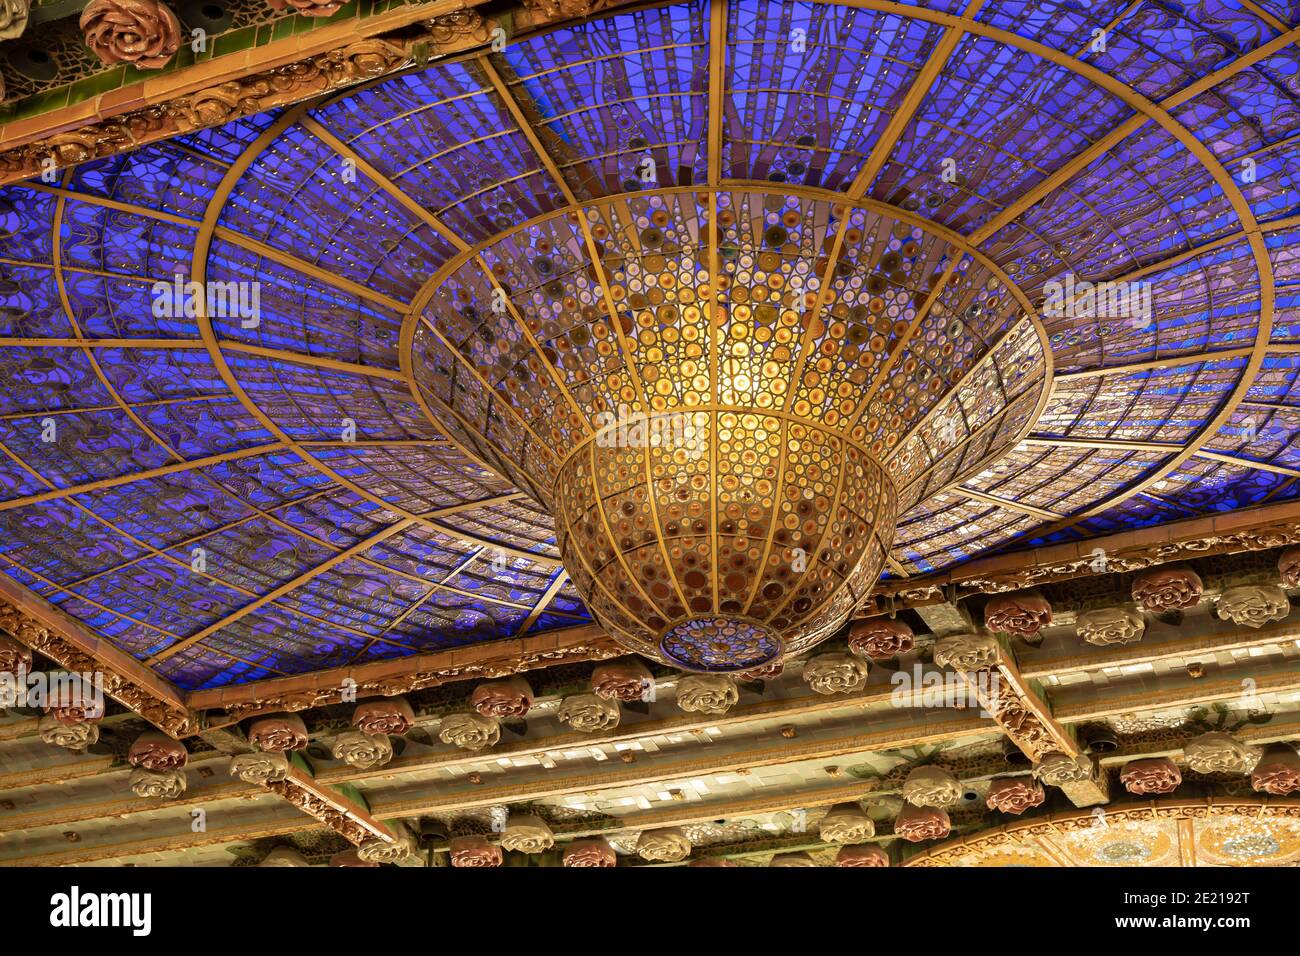 Stained-glass skylight of the Palau de la Musica Catalana's modernisme interior looks like a lamp or the Chandelier Stock Photo